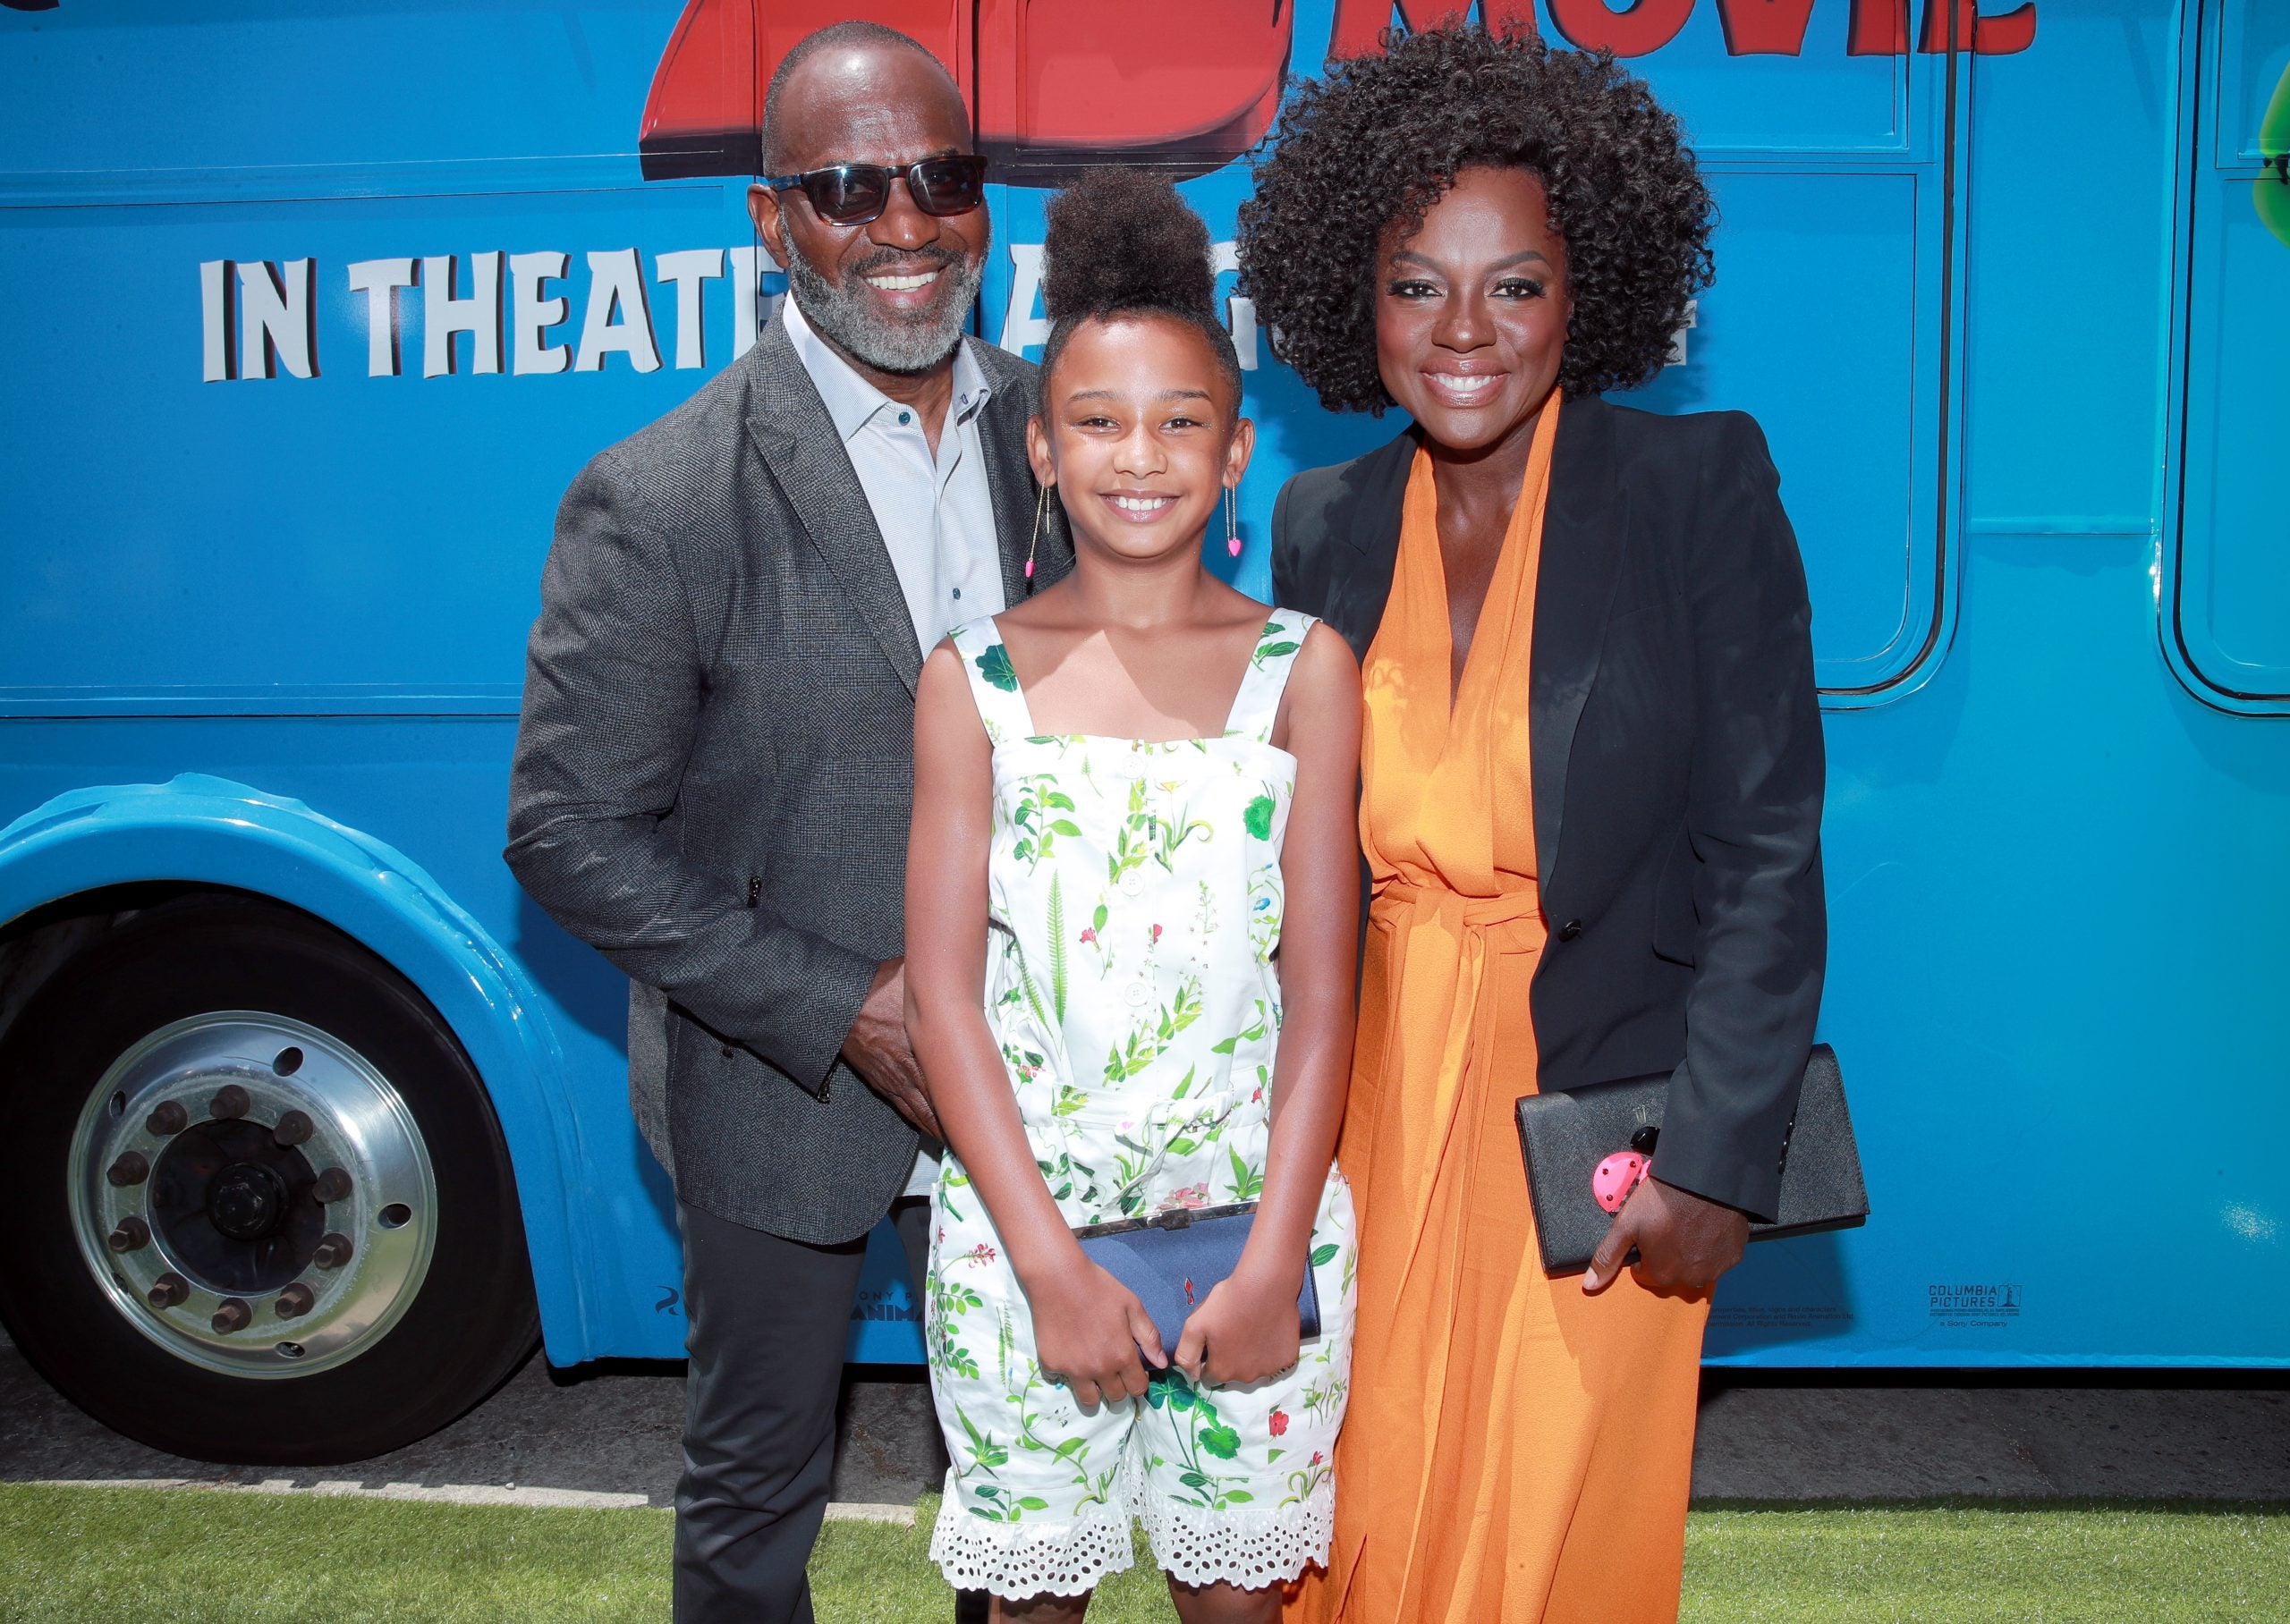 She's Growing Up! Viola Davis And Daughter Genesis Hit The Red Carpet